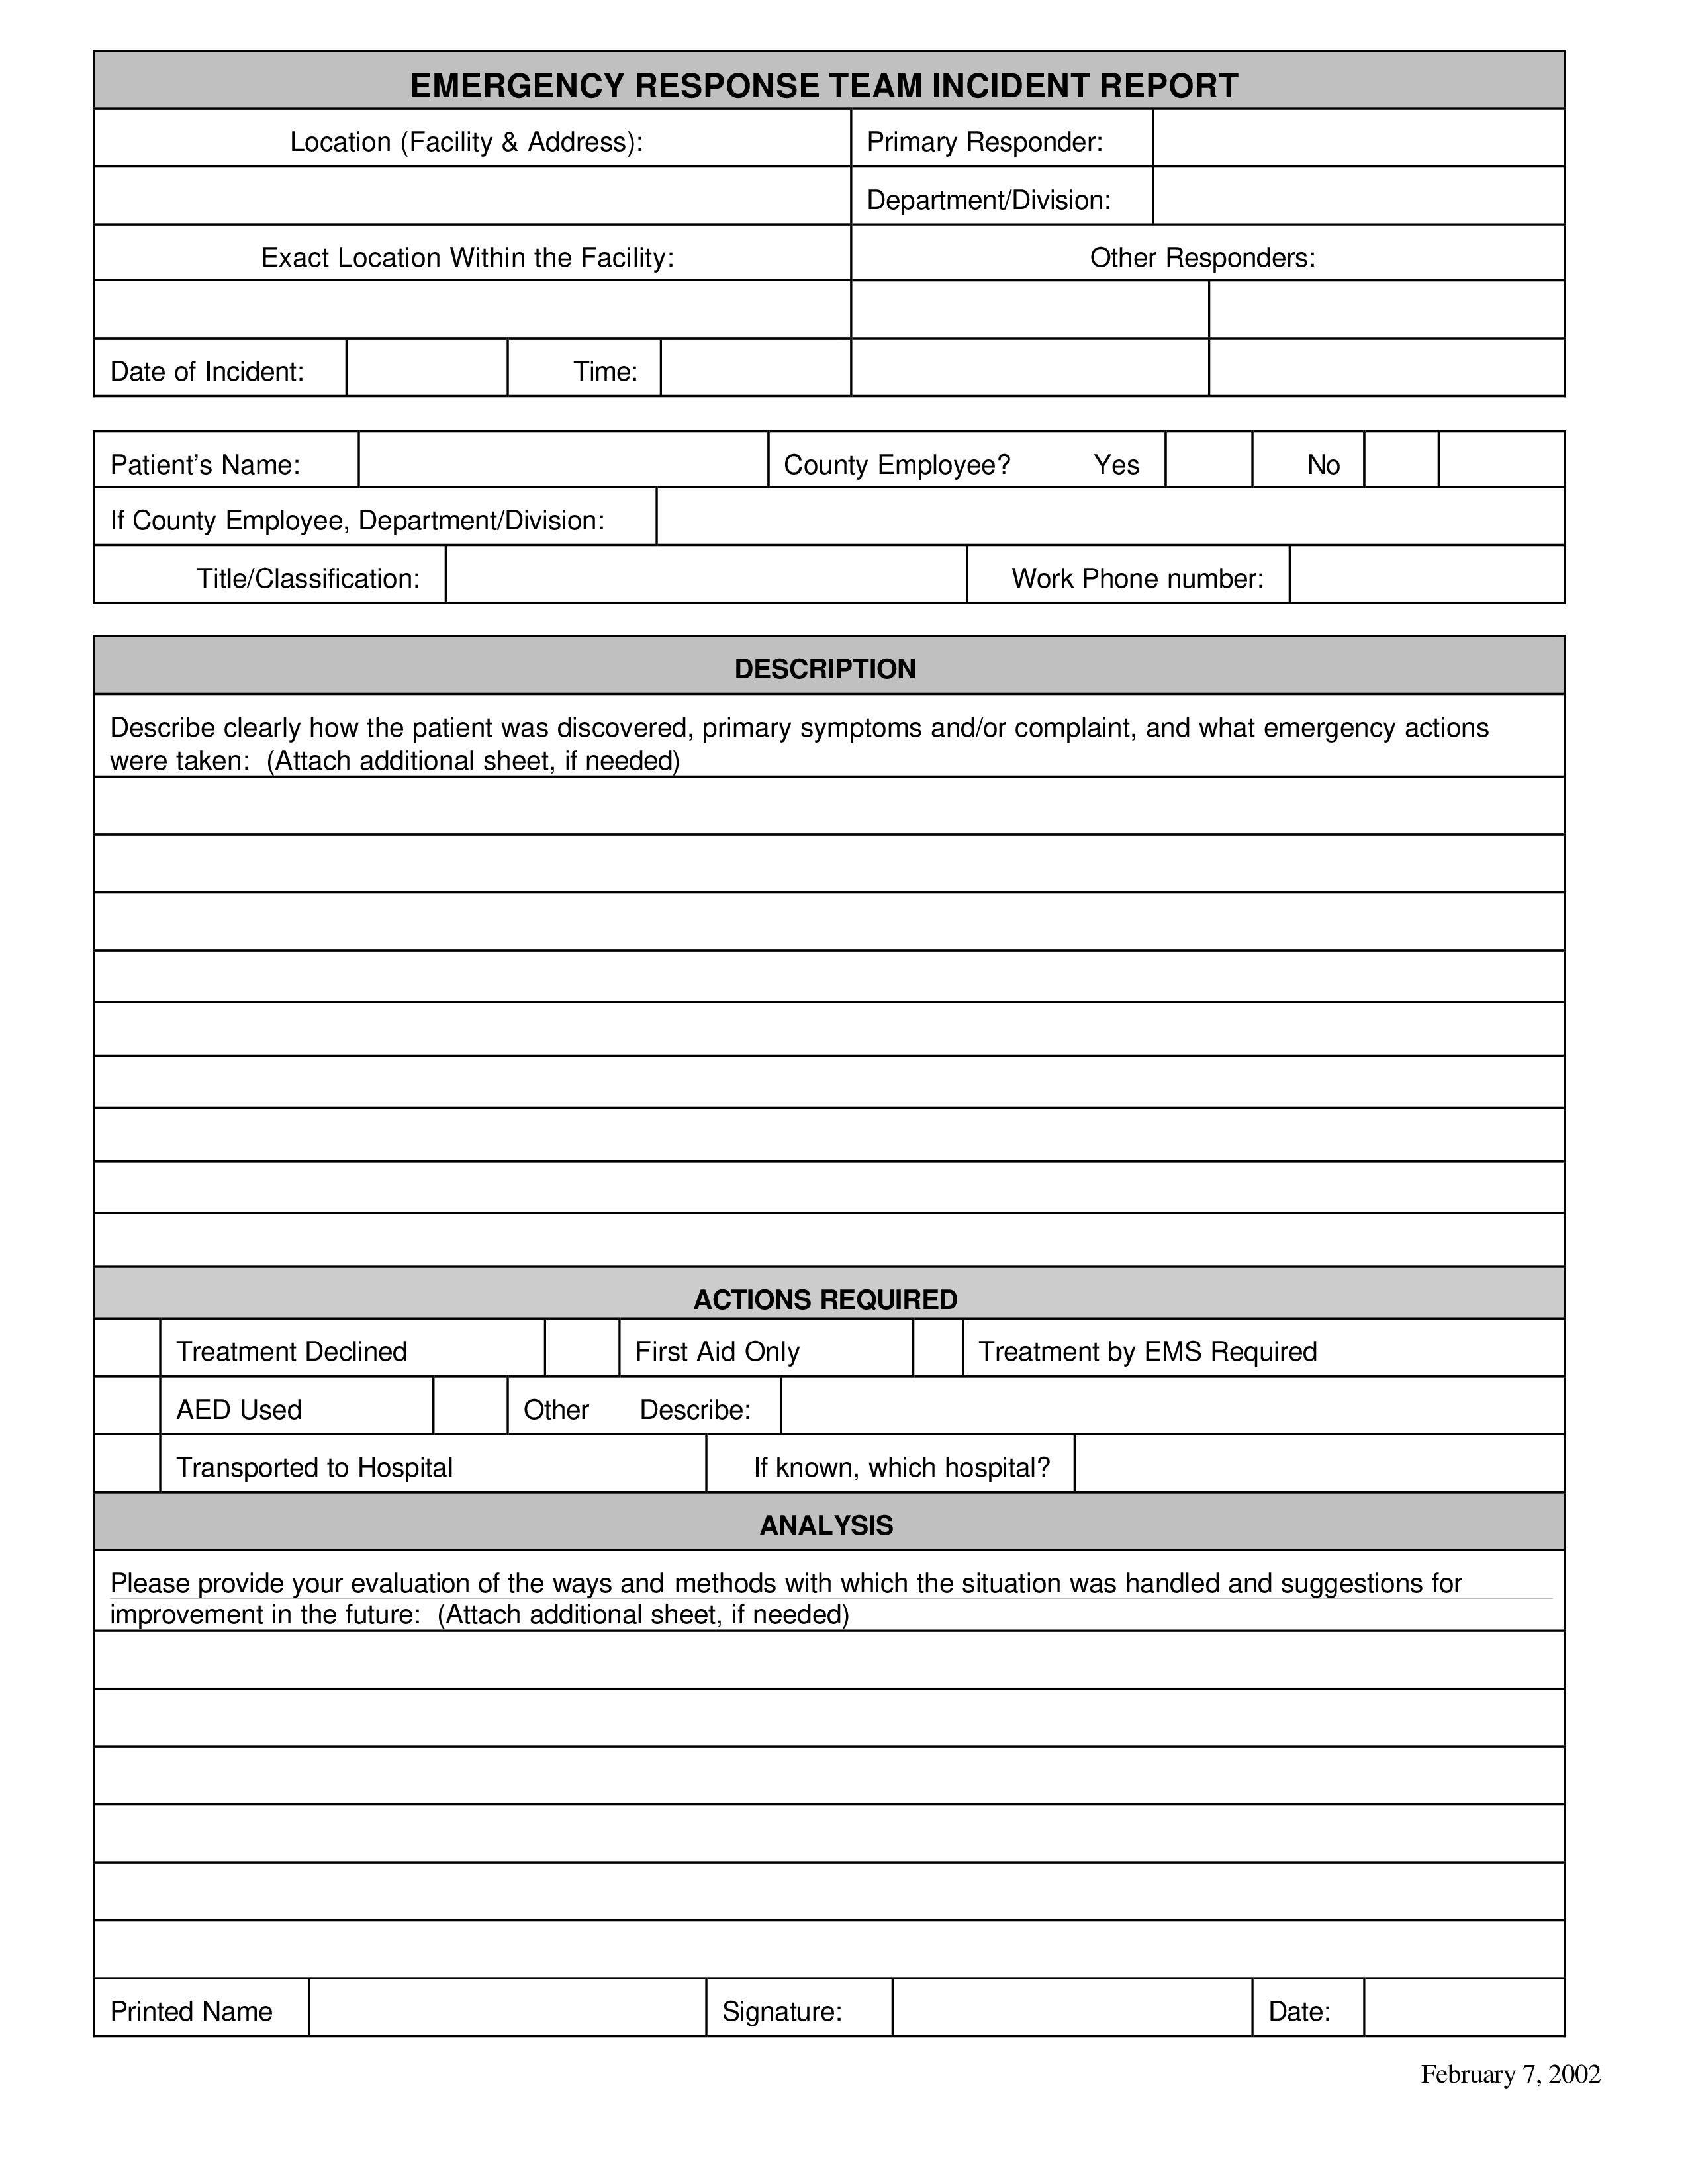 Incident Report Form Template